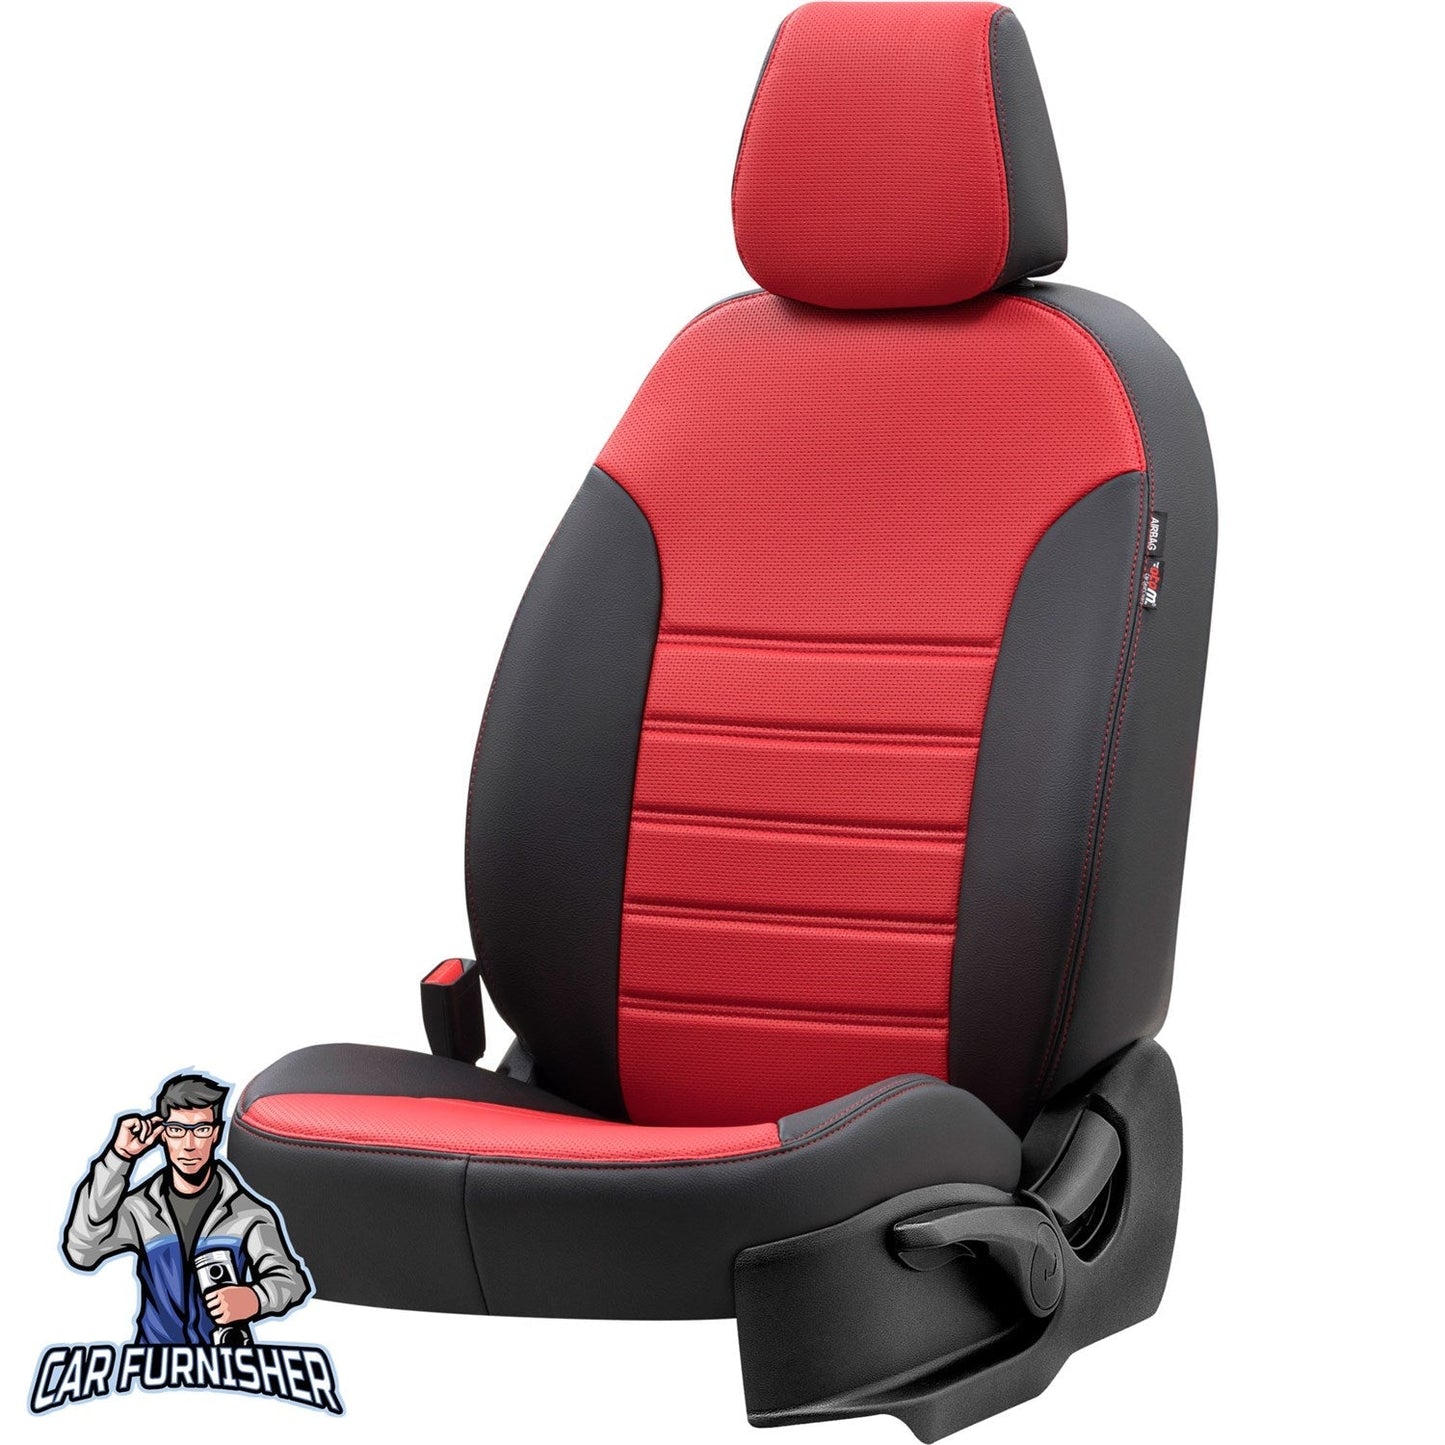 Hyundai i10 Seat Covers New York Leather Design Red Leather